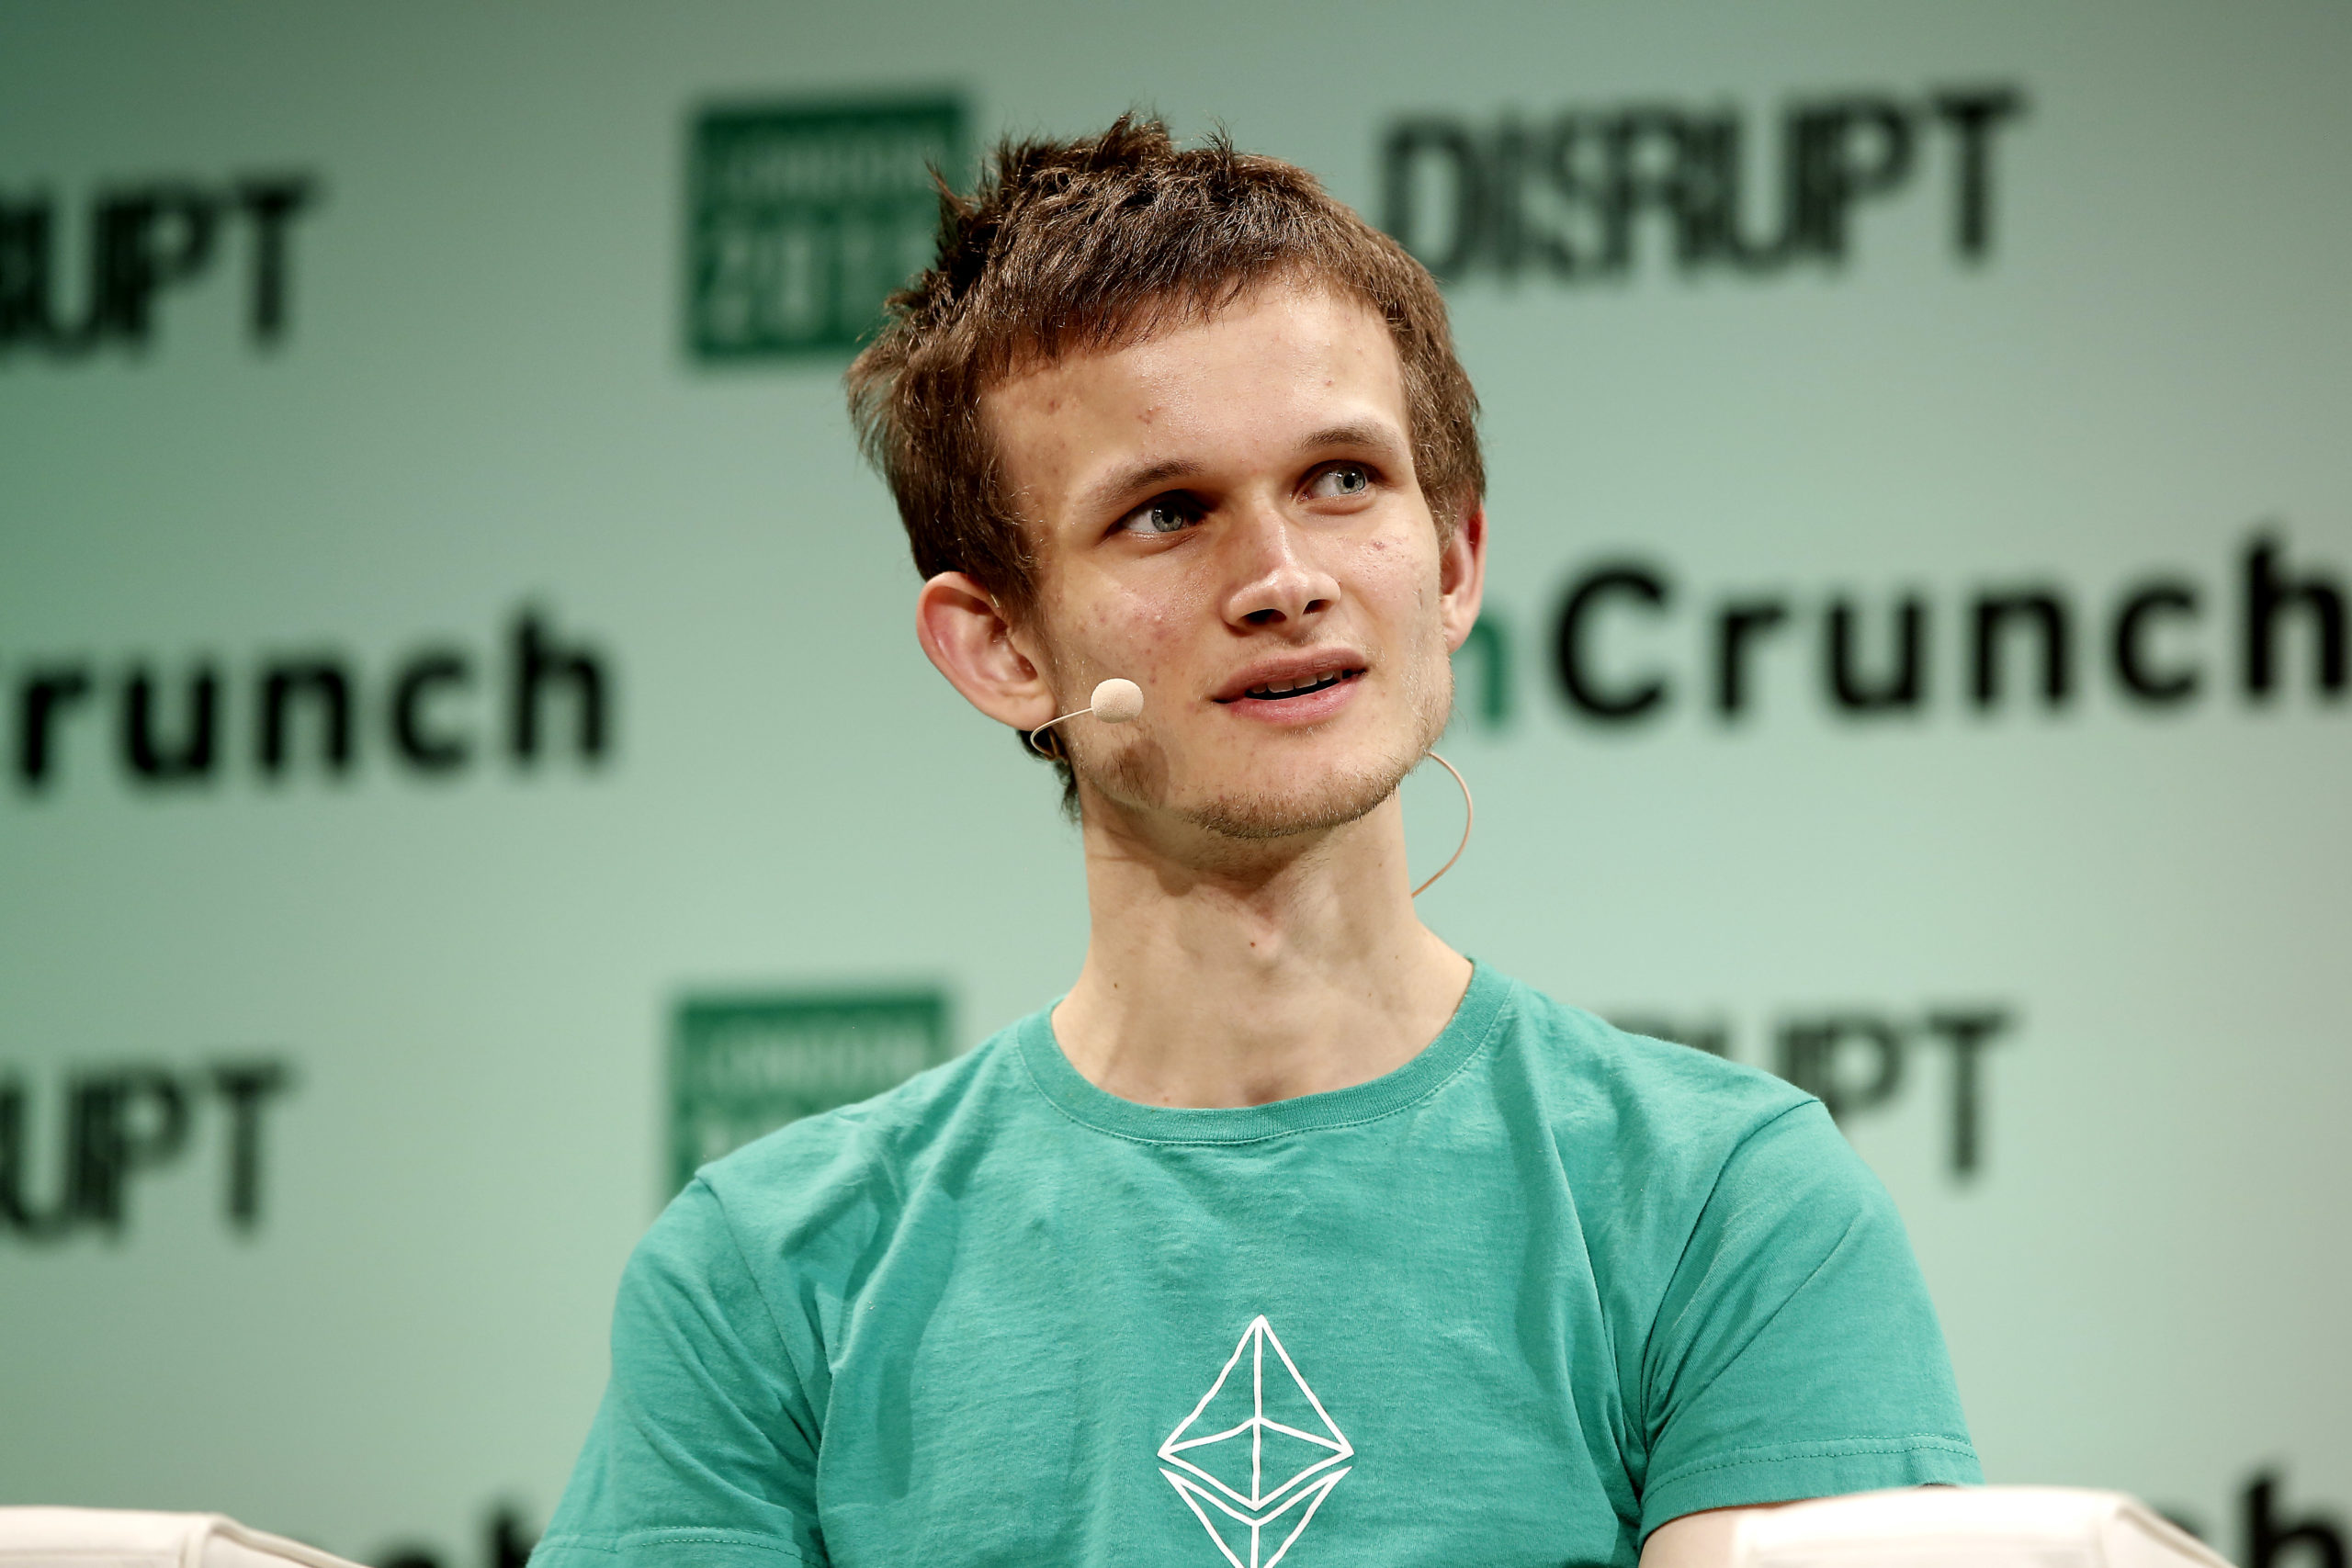 Ethereum co-founder says every ‘average smallholder’ of Terra’s stablecoin should be made whole: ‘The obvious precedent is FDIC insurance’